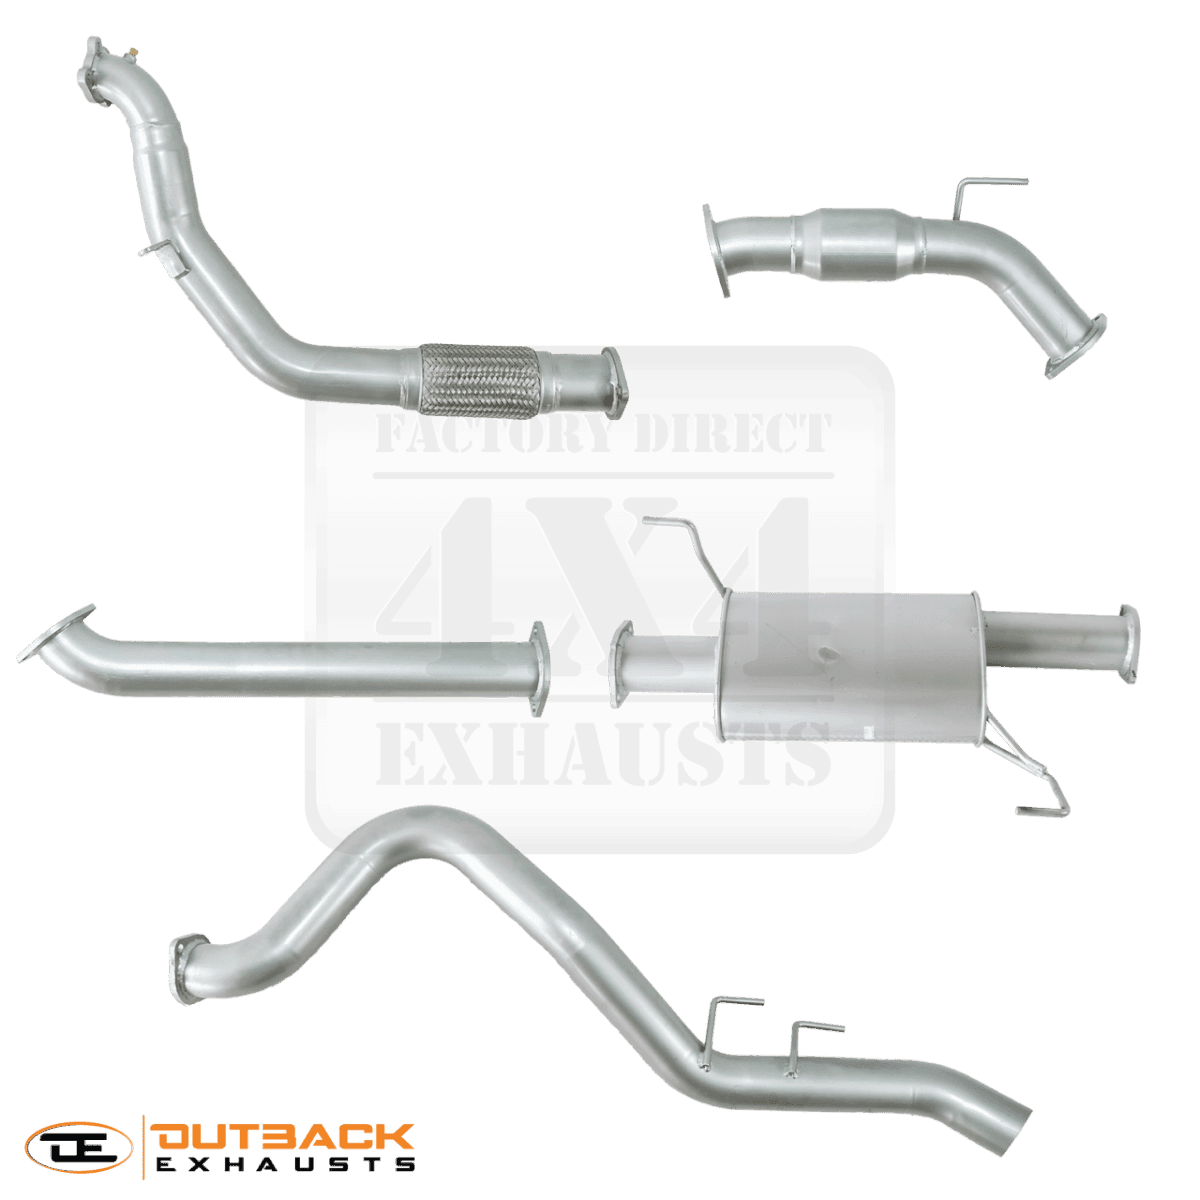 Outback Exhaust 3.5" Exhaust system to suit Isuzu D-Max / Holden Colorado 2007-2010 - NZ Offroader